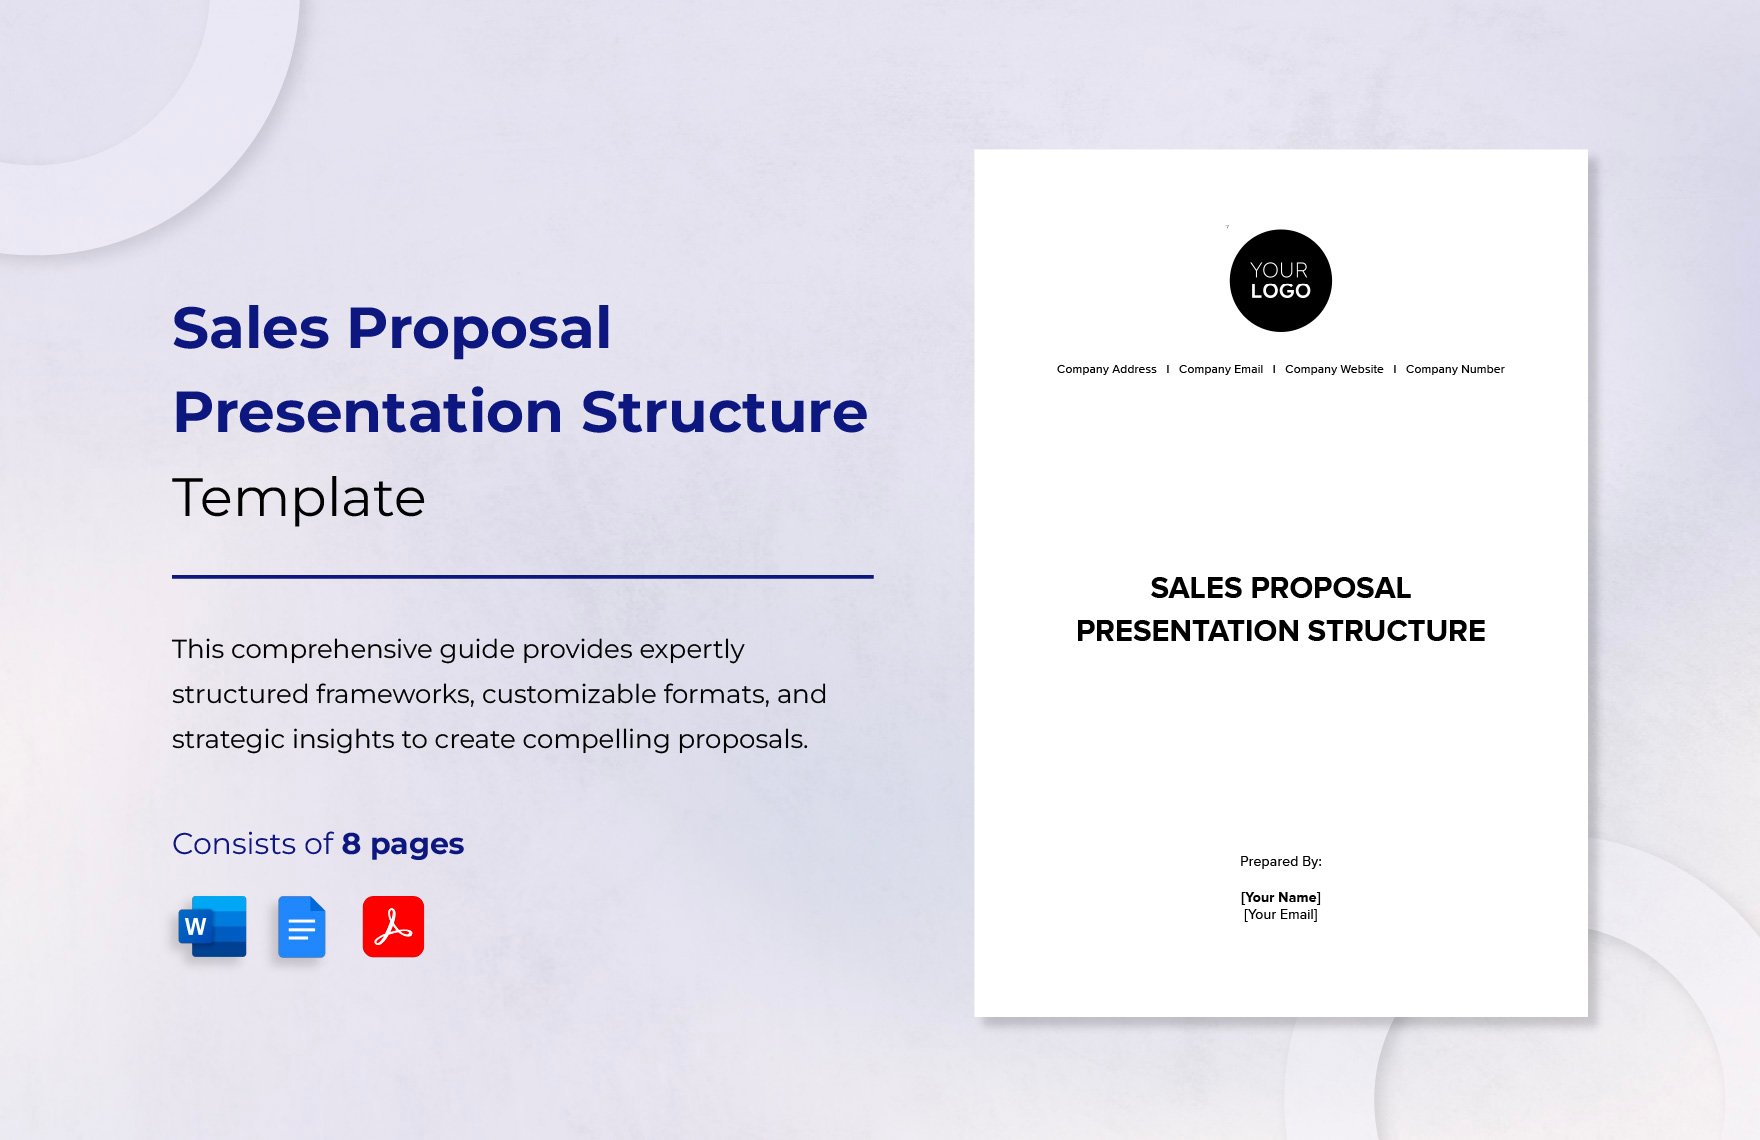 Sales Proposal Presentation Structure Template in Word, Google Docs, PDF